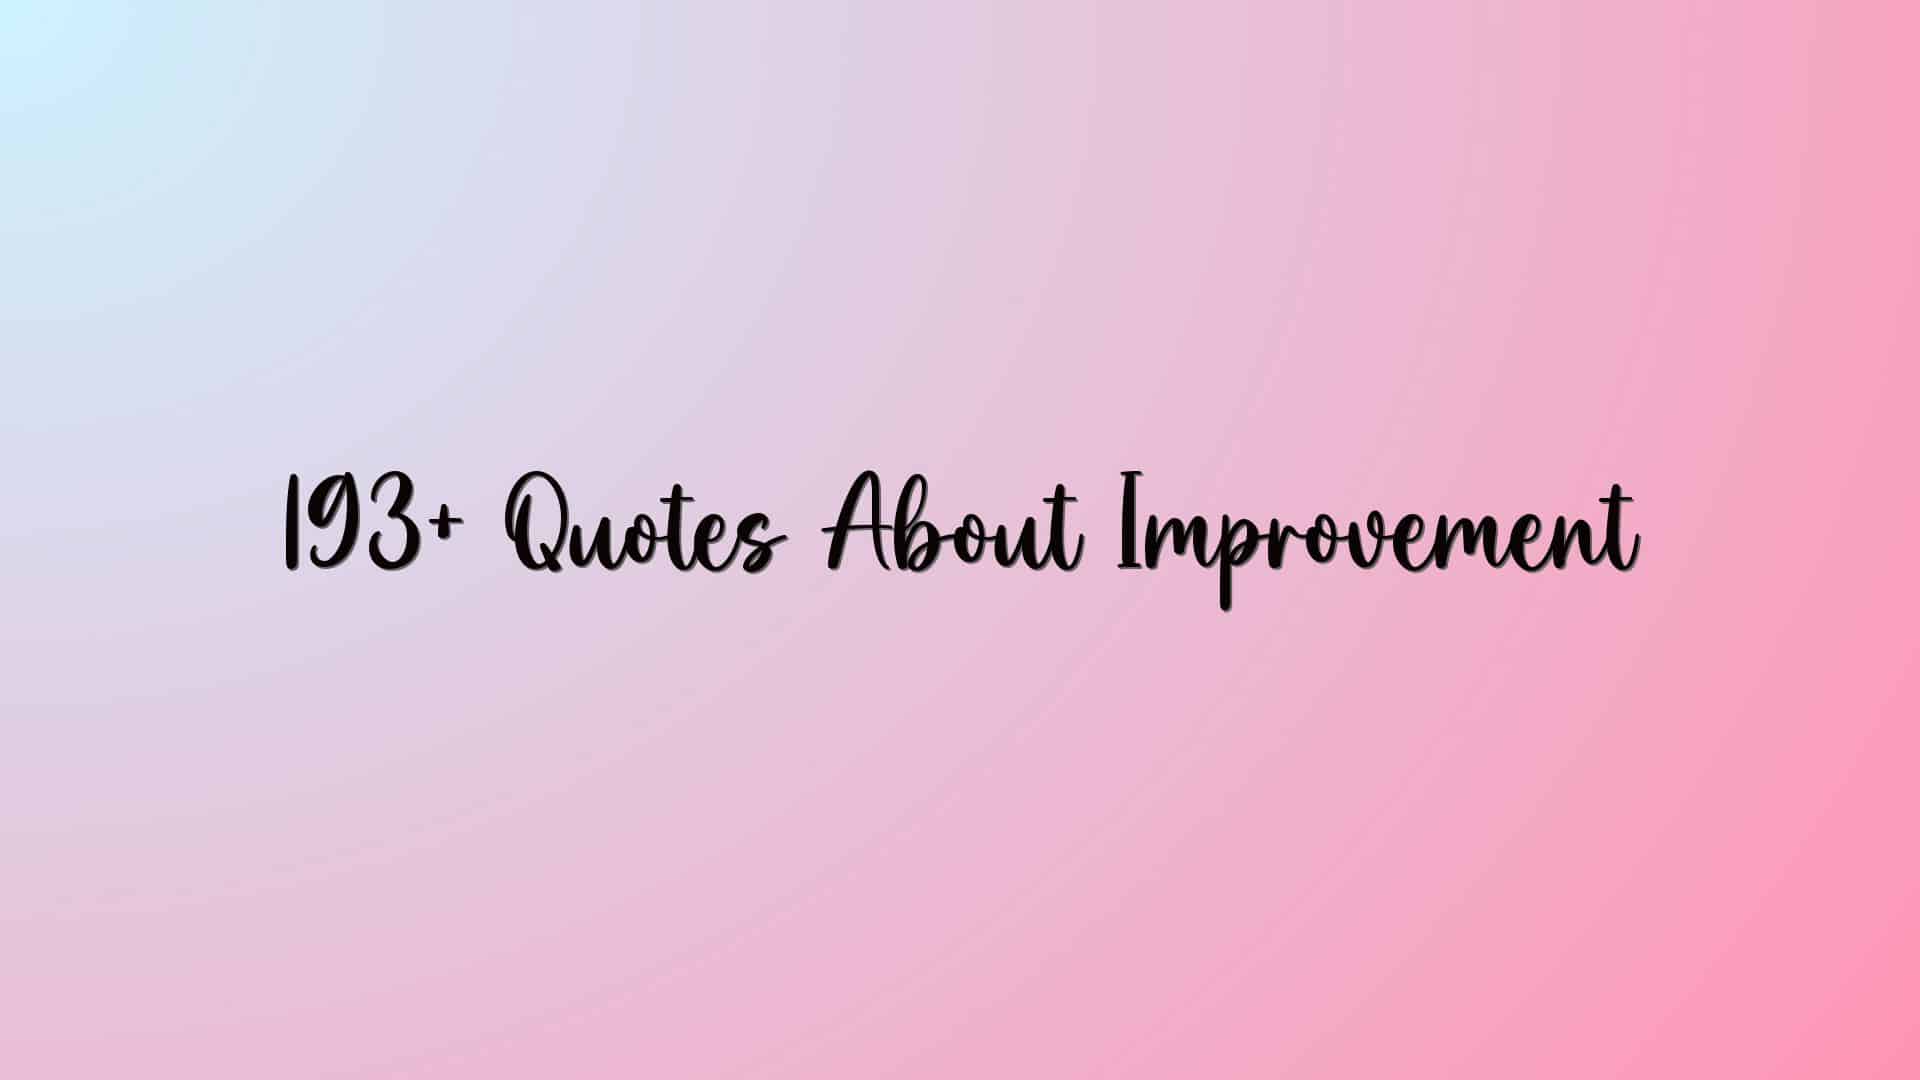 193+ Quotes About Improvement